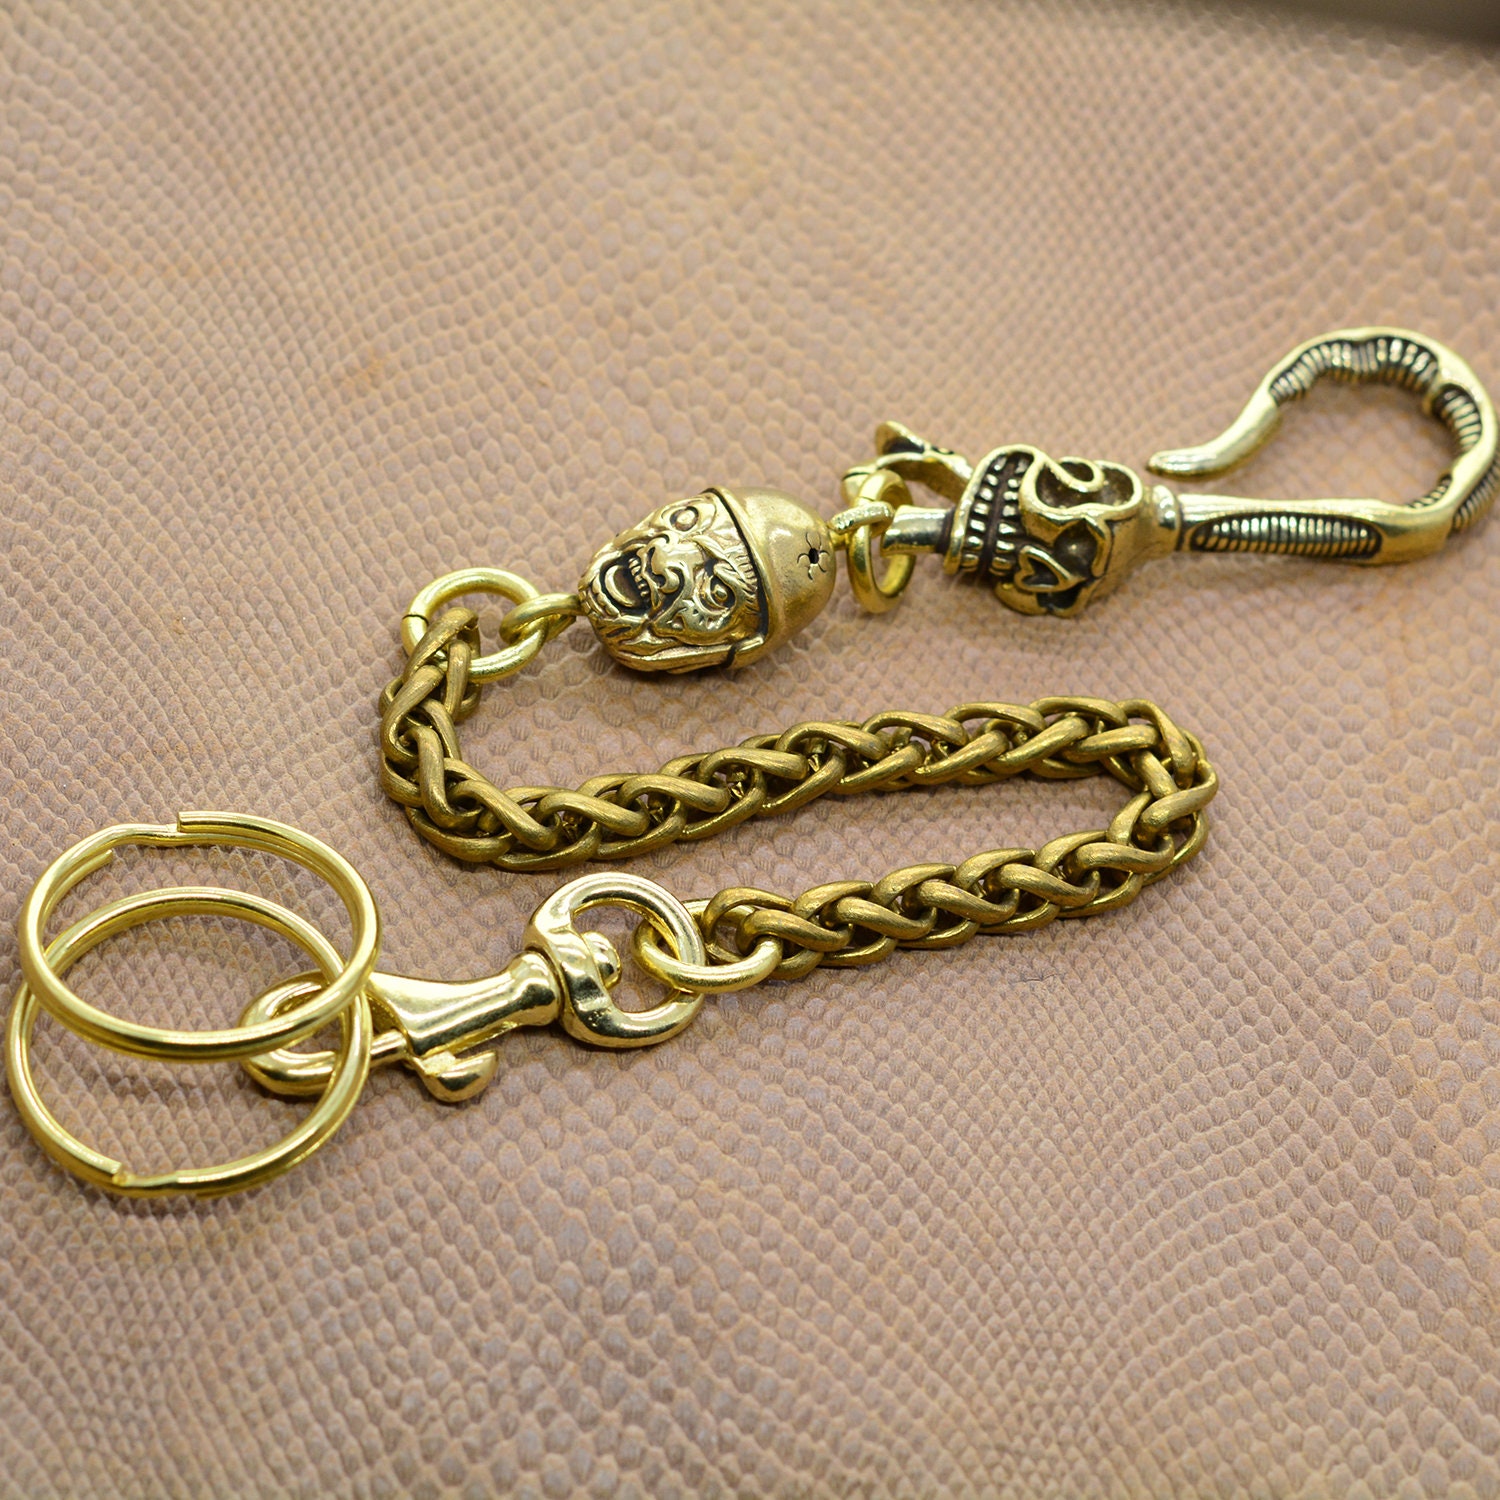 Solid Brass Bag Wallet Chain key chain Snake Chain Snap Hook Fob Keychains 